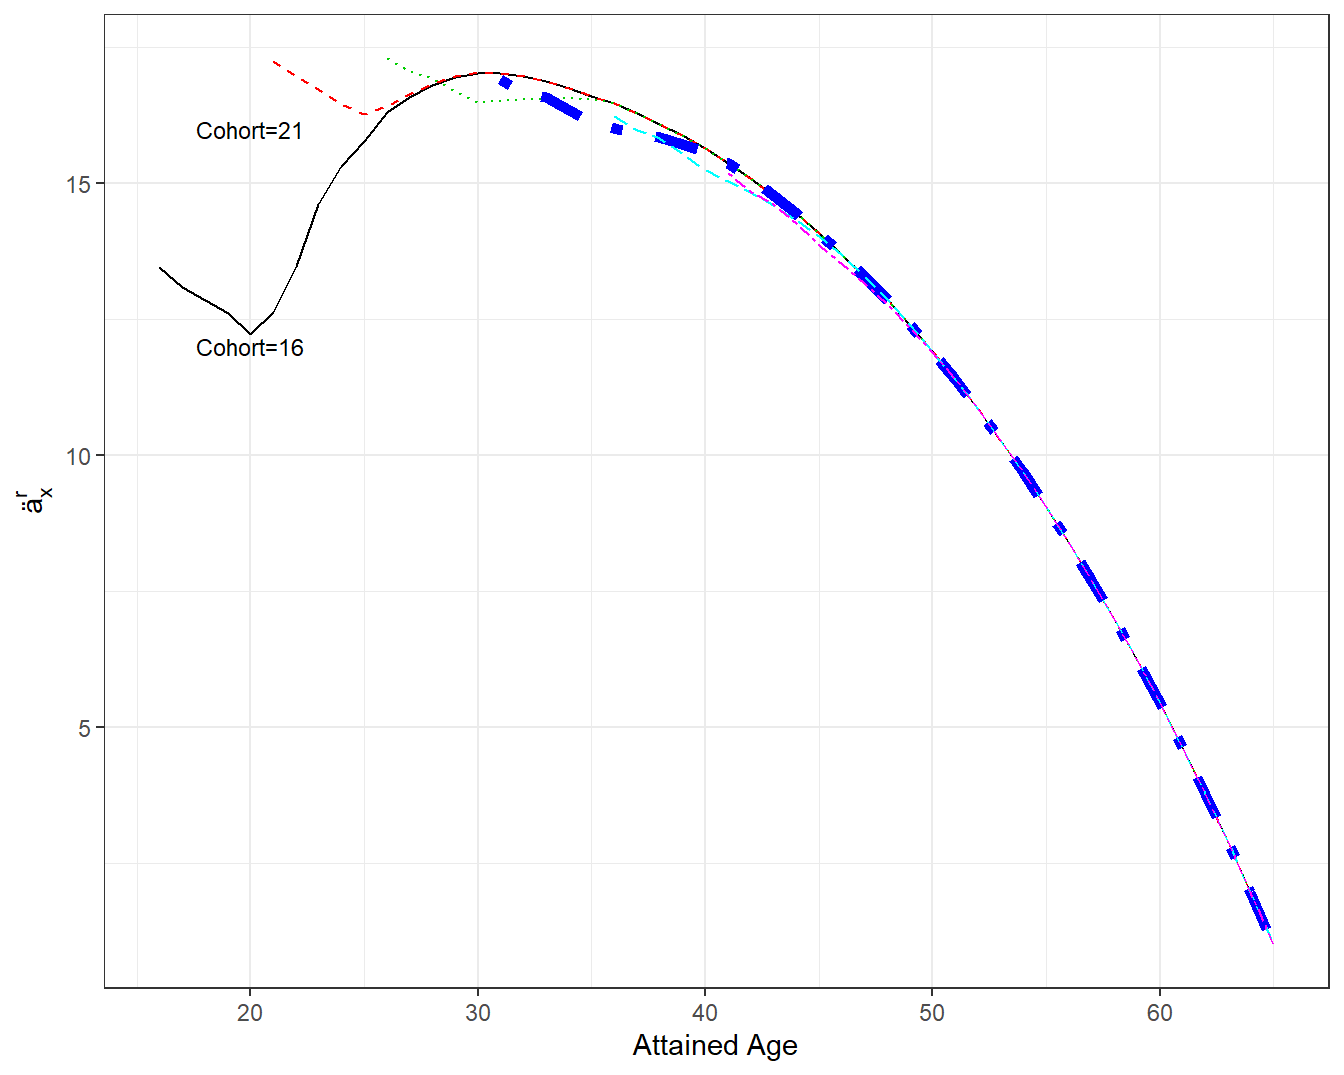 Annuities by Attained Age and Cohort. A plot of annuities \(ä_x^r\) by attained age \(x\). Each line represents a different cohort. The first two cohorts plotted first receiving disability benefits at age 16 and 21 differ in the early annuity values. Beginning at attained age 30, all annuity values appear to be qualitatively similar. The thick dashed blue line marks annuity values for the cohort=31.